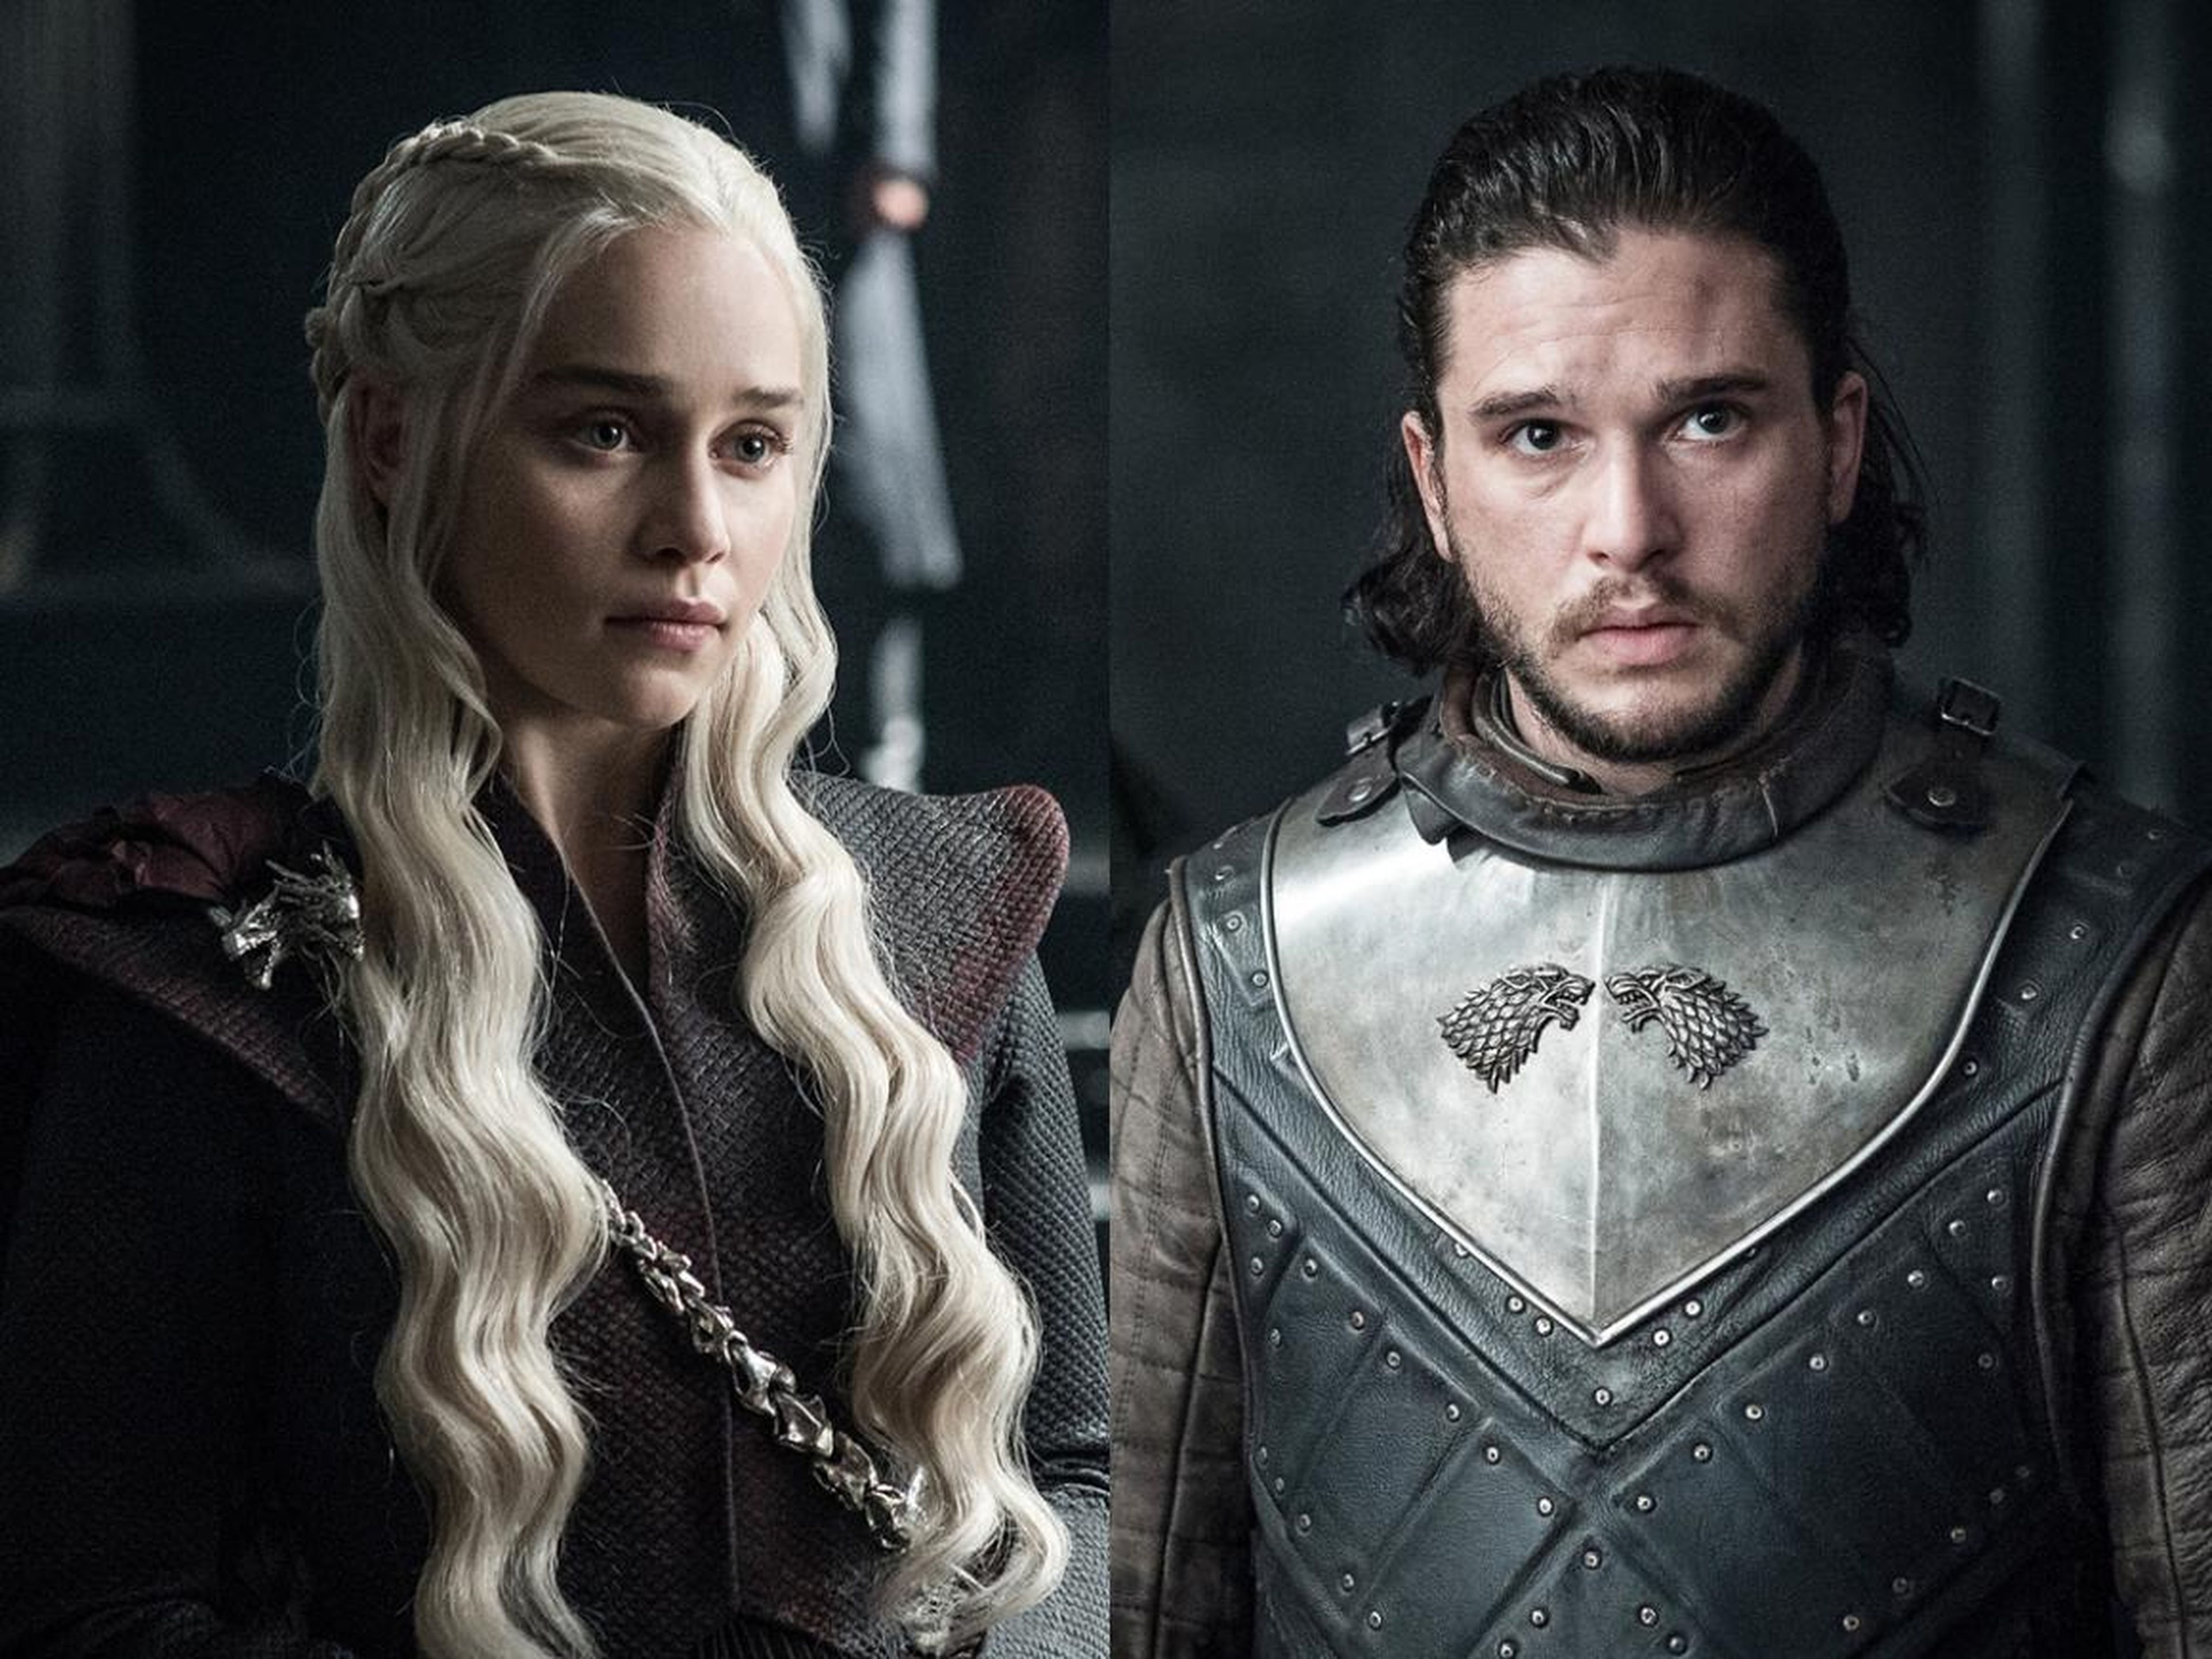 Will it be as simple as Daenerys and Jon versus Cersei and Euron? Or will things get complicated again?